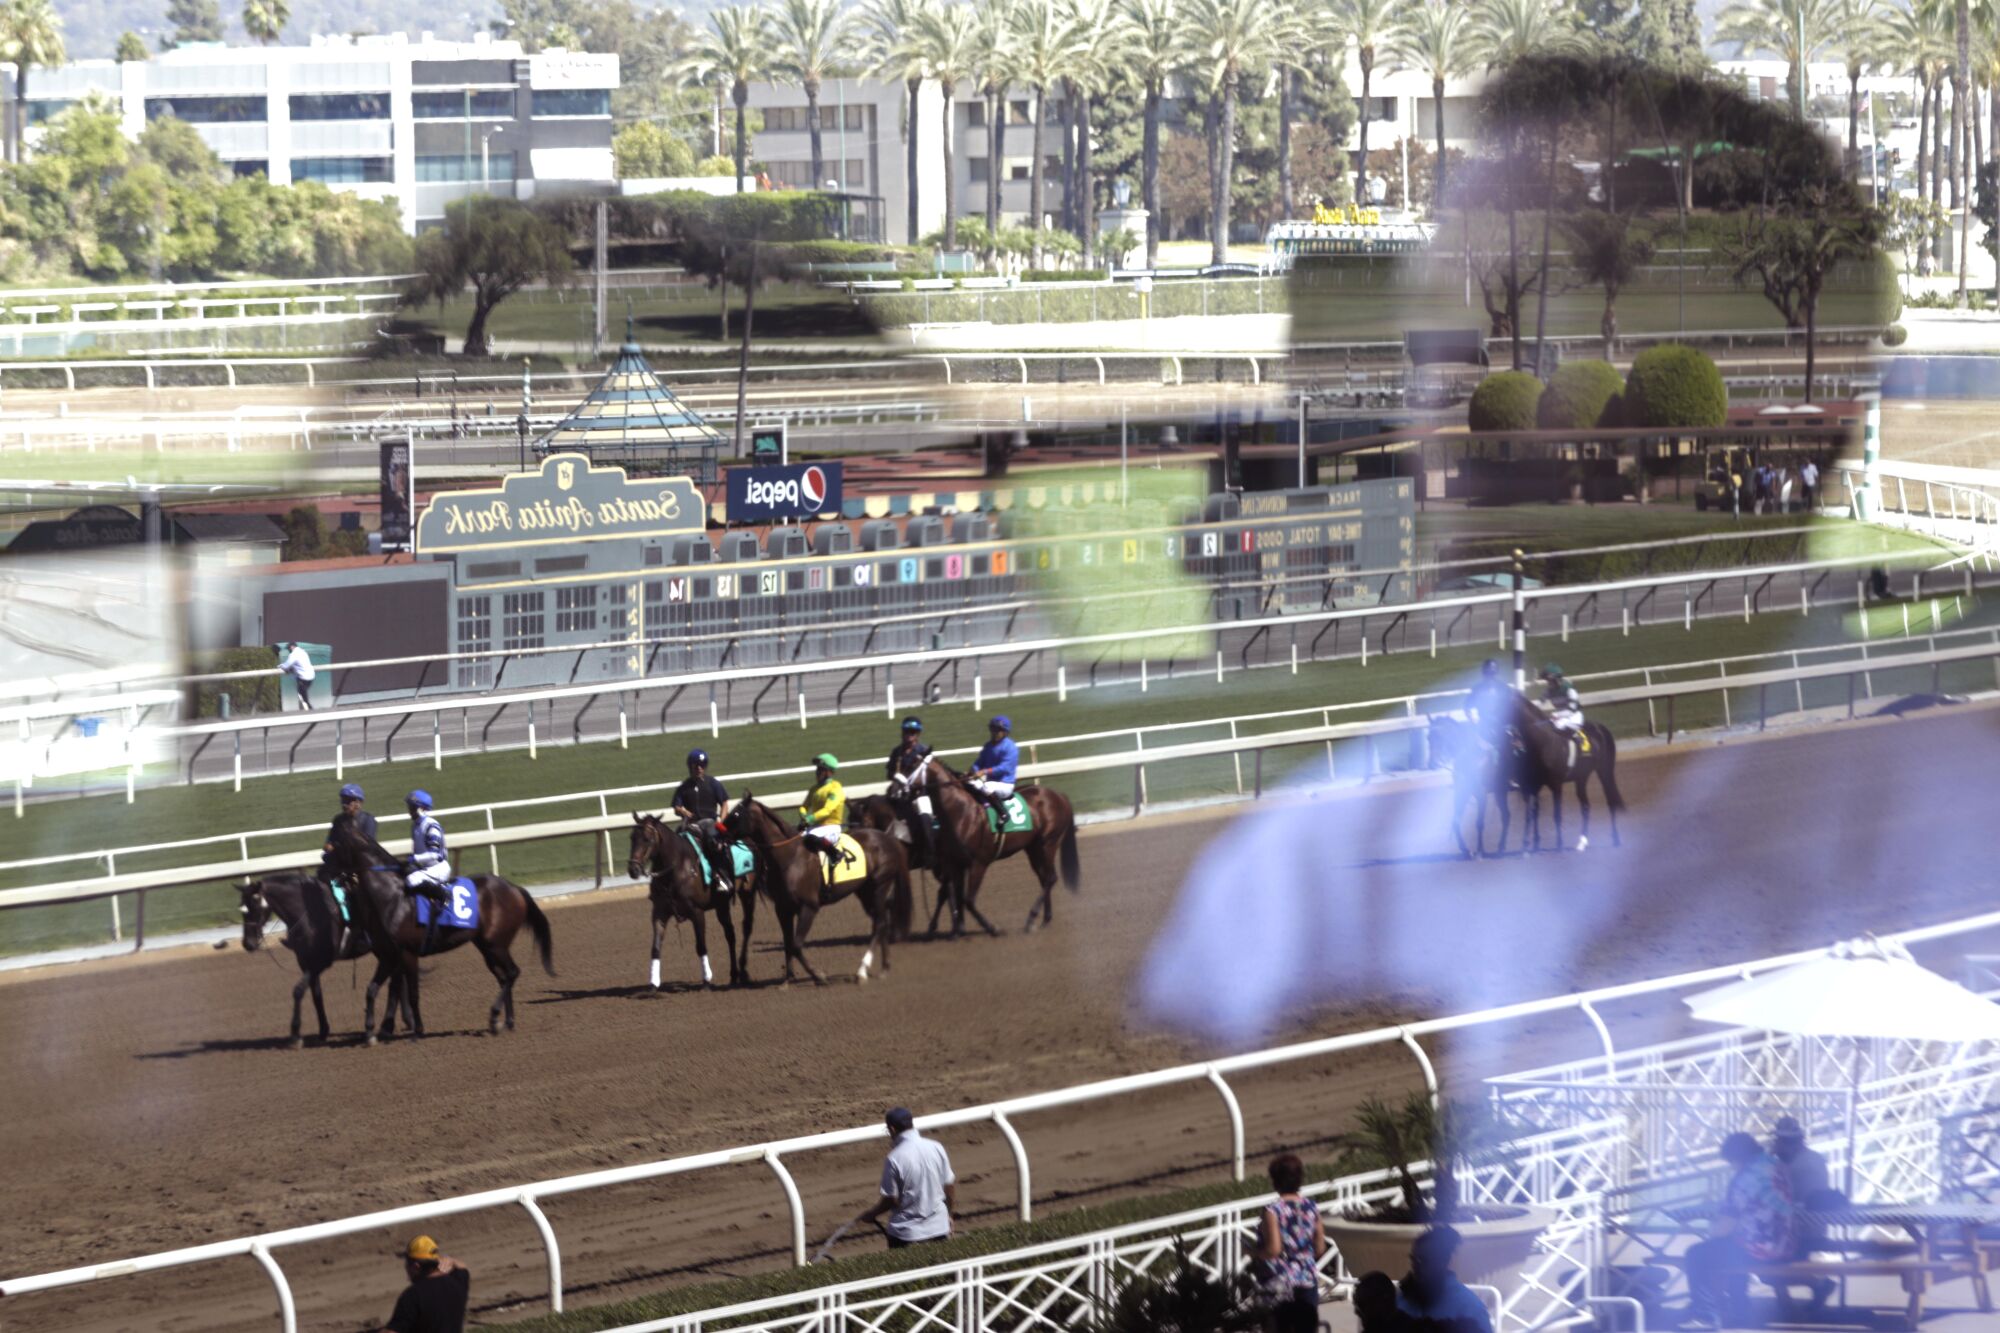 Riders take to the track on opening day at Santa Anita Park in Arcadia on Oct. 1, 2021.